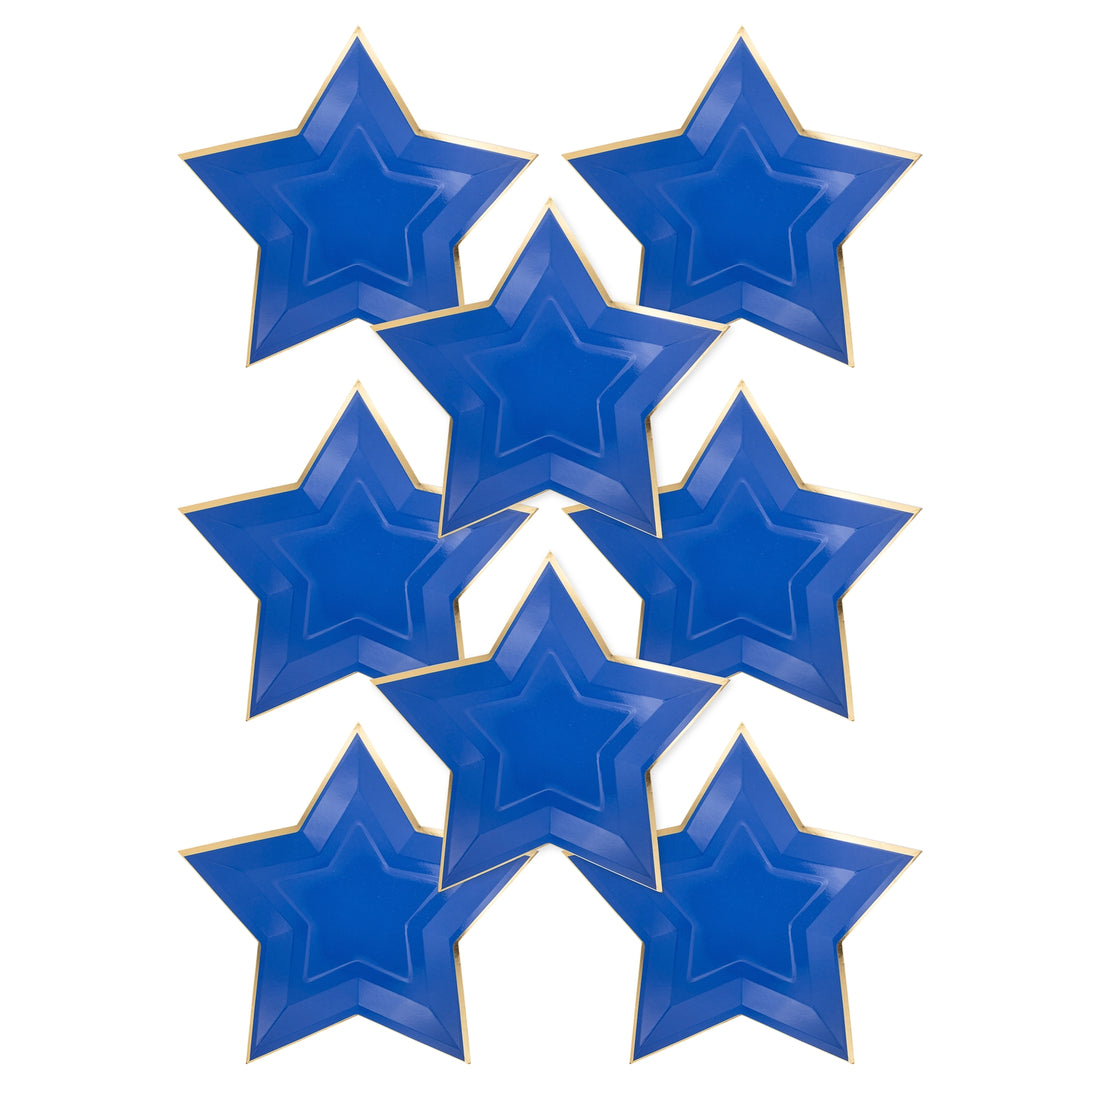 Blue star shaped paper plates with gold foil rim on a white background.